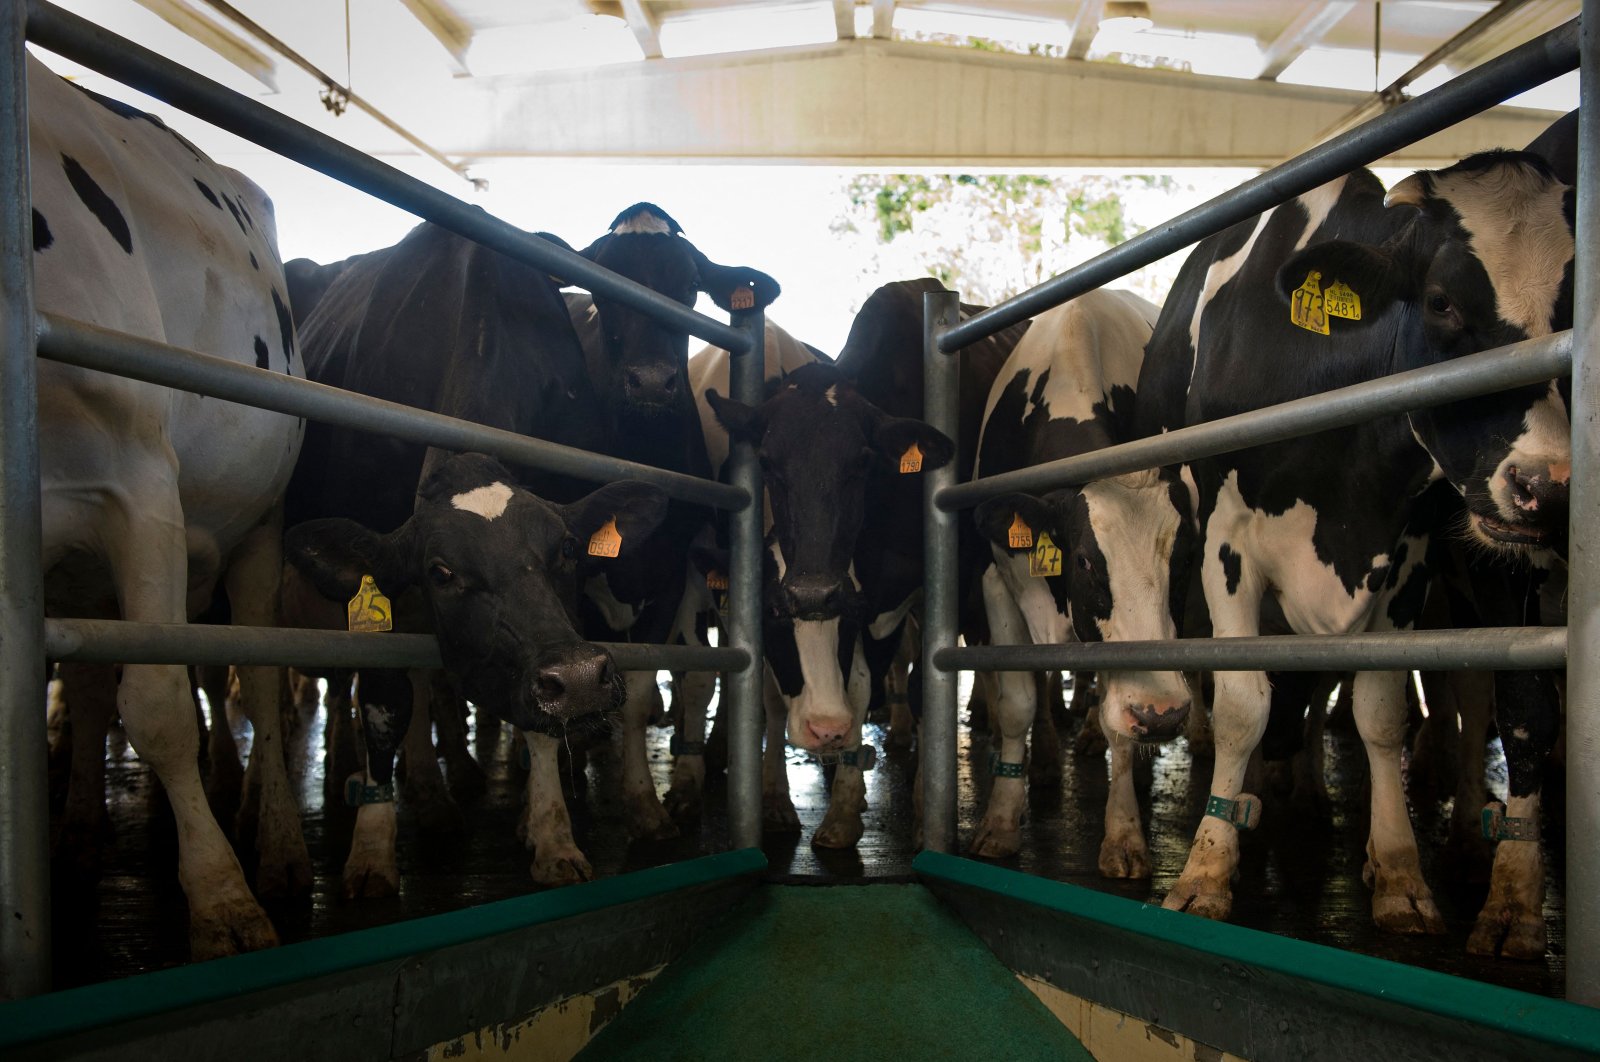 Cows wait to be milked at the Grille Sociedade Cooperativa Galega farm near the village of Mazaricos, northwestern Spain, Sept. 3, 2015. (AFP Photo)